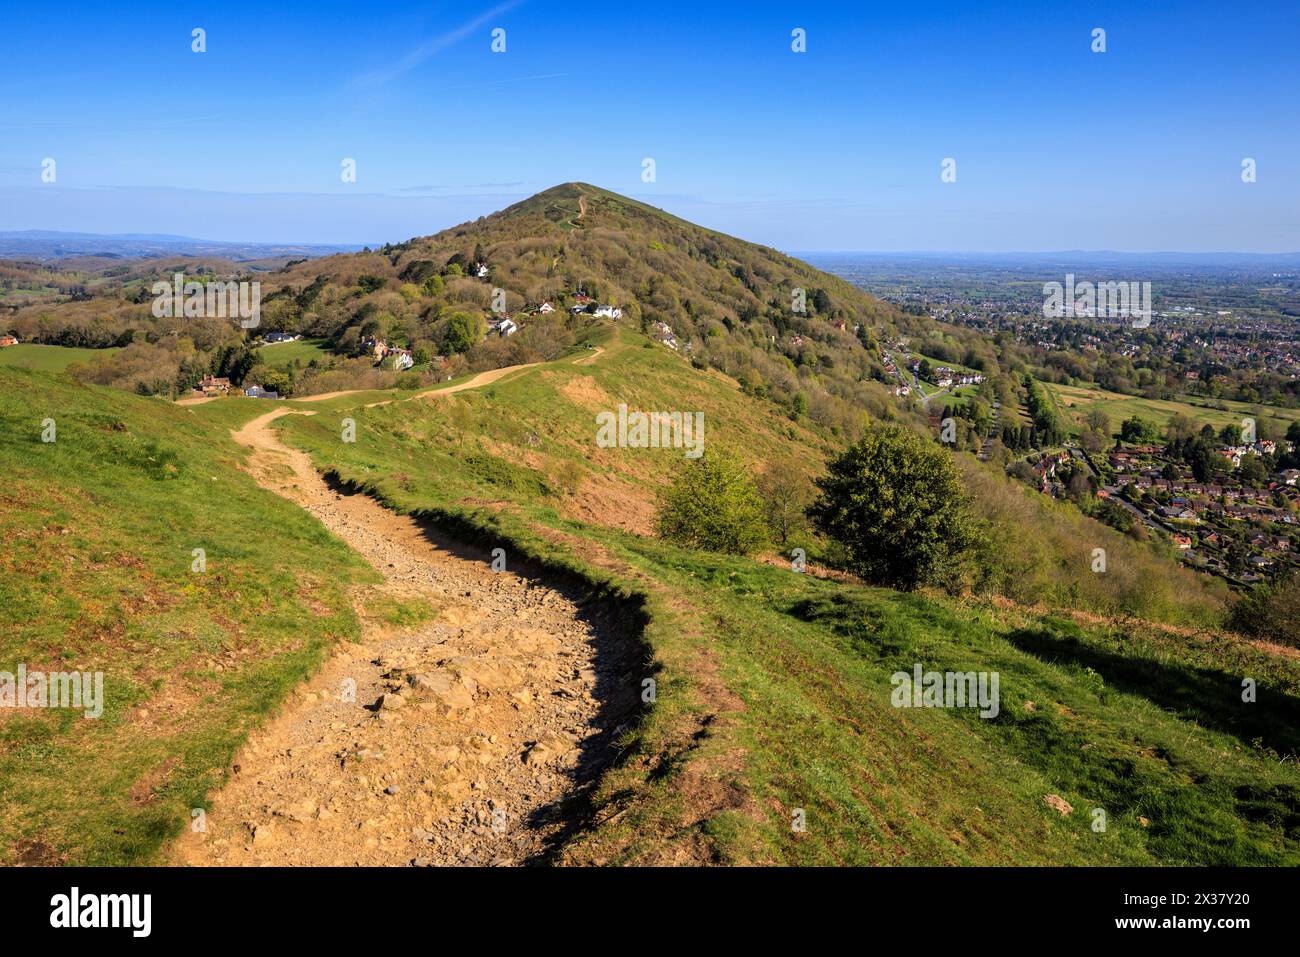 Worcestershire Beacon de Perseverance Hill, Malverns, Herefordshire et Worcestershire, Angleterre Banque D'Images